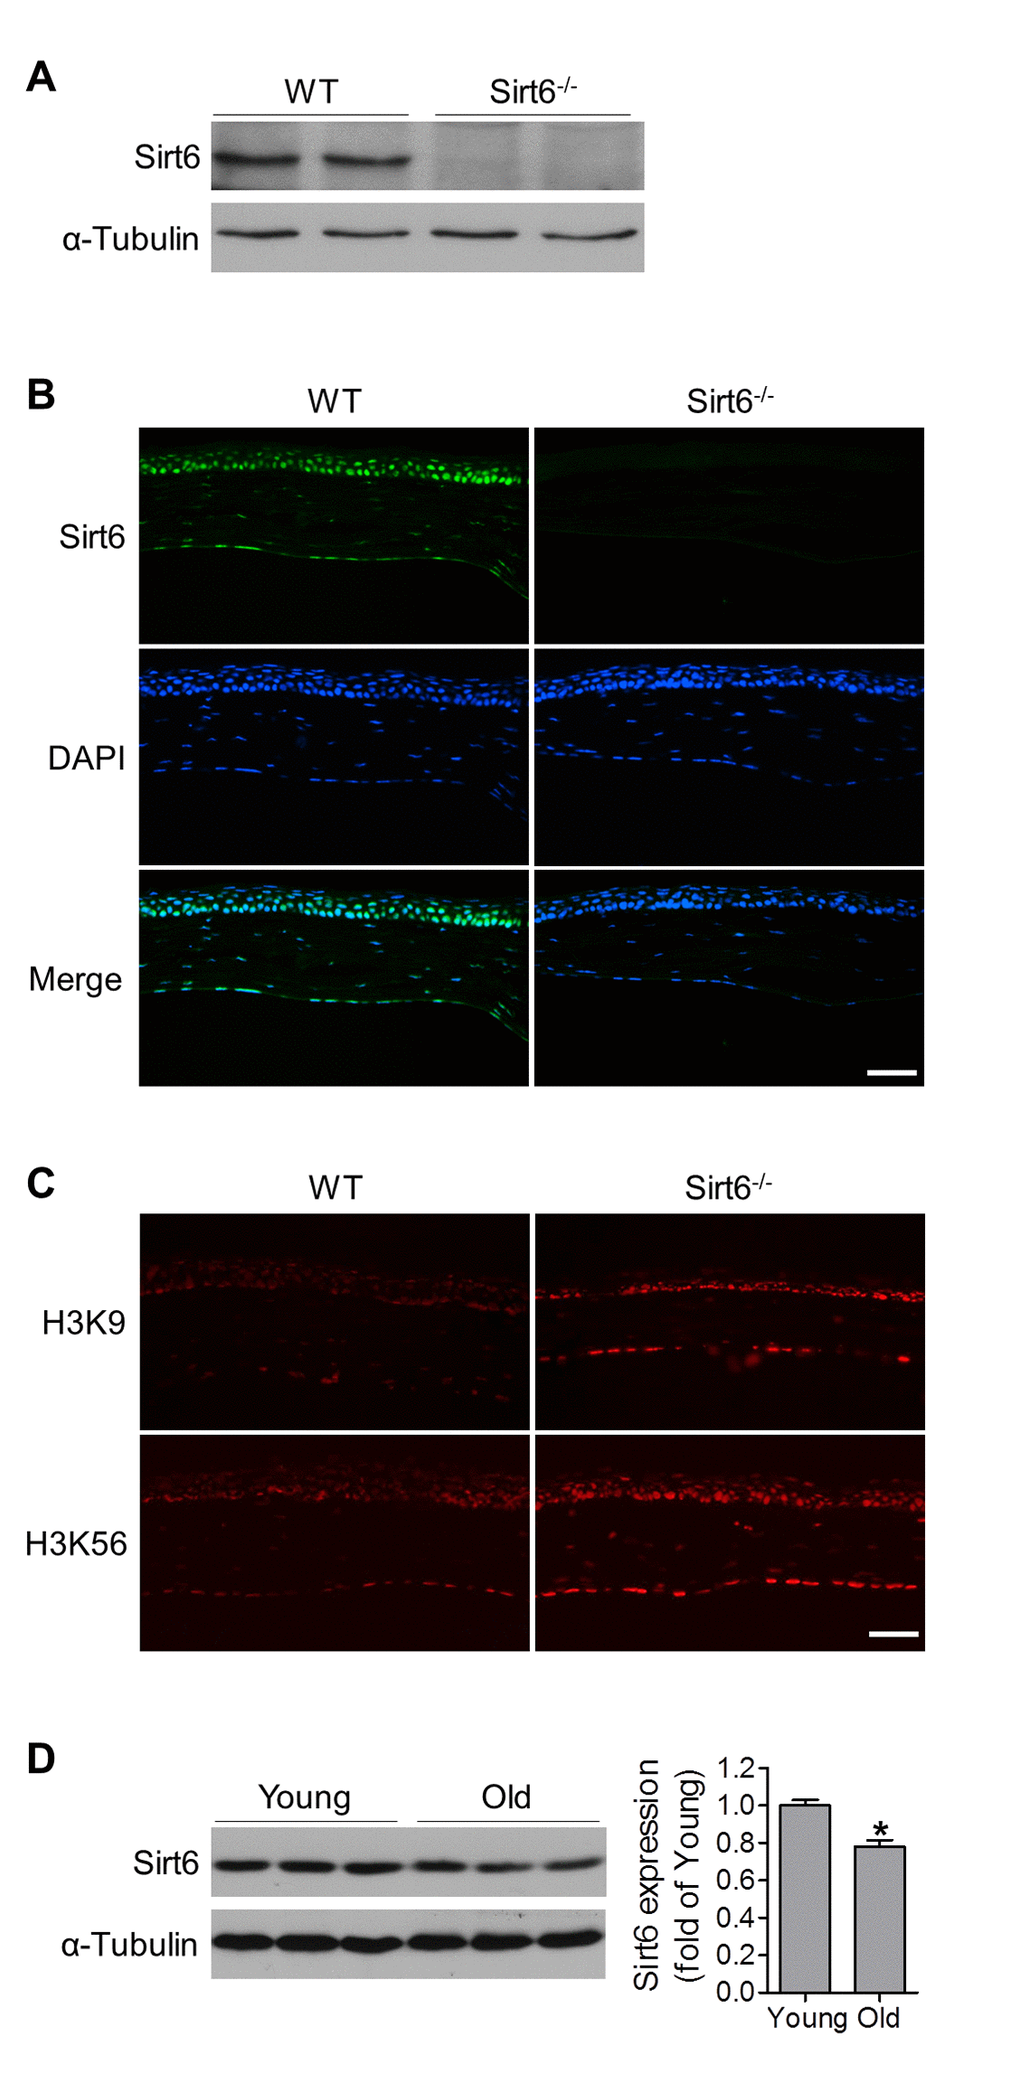 Functional Sirt6 is expressed in mouse cornea. (A) Protein was extracted from the corneas of WT and Sirt6-/- mice and Sirt6 protein expression was assessed by Western blot analysis. α-Tubulin served as loading control. (B, C) Immunostaining of Sirt6 (green), H3K9 and H3K56 (red) in corneal cryosections from 2 month-old WT and Sirt6 KO mice. Blue: DAPI staining for nuclei. Scale bar: 50μm. (D) Sirt6 protein expression in young (2 months old) and old (12 months old) mice cornea. Two corneas served as one specimen. *p